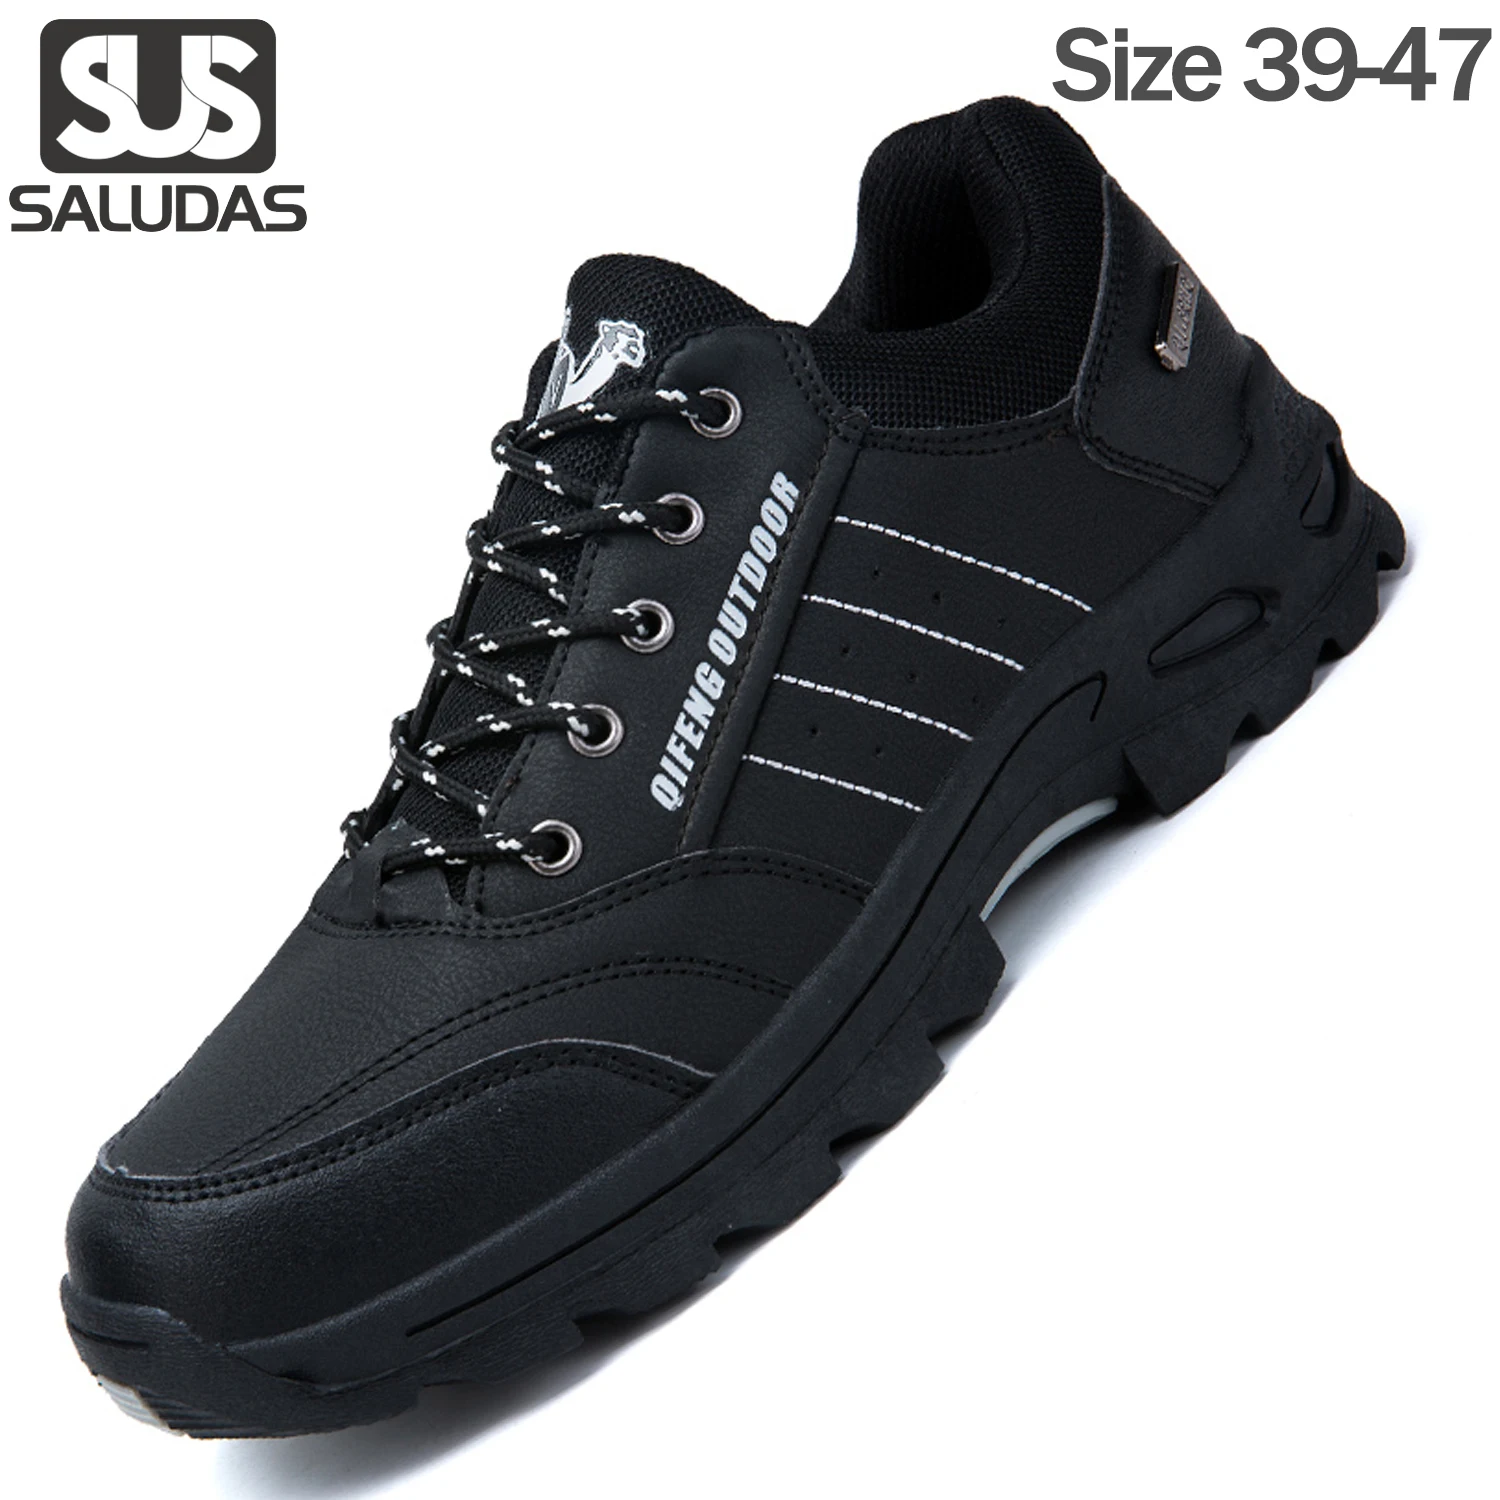 

SALUDAS Men Waterproof Hiking Shoes Lightweight Leather Low-Top Hiking Shoes for Outdoor Trailing Trekking Camping Walking Shoes